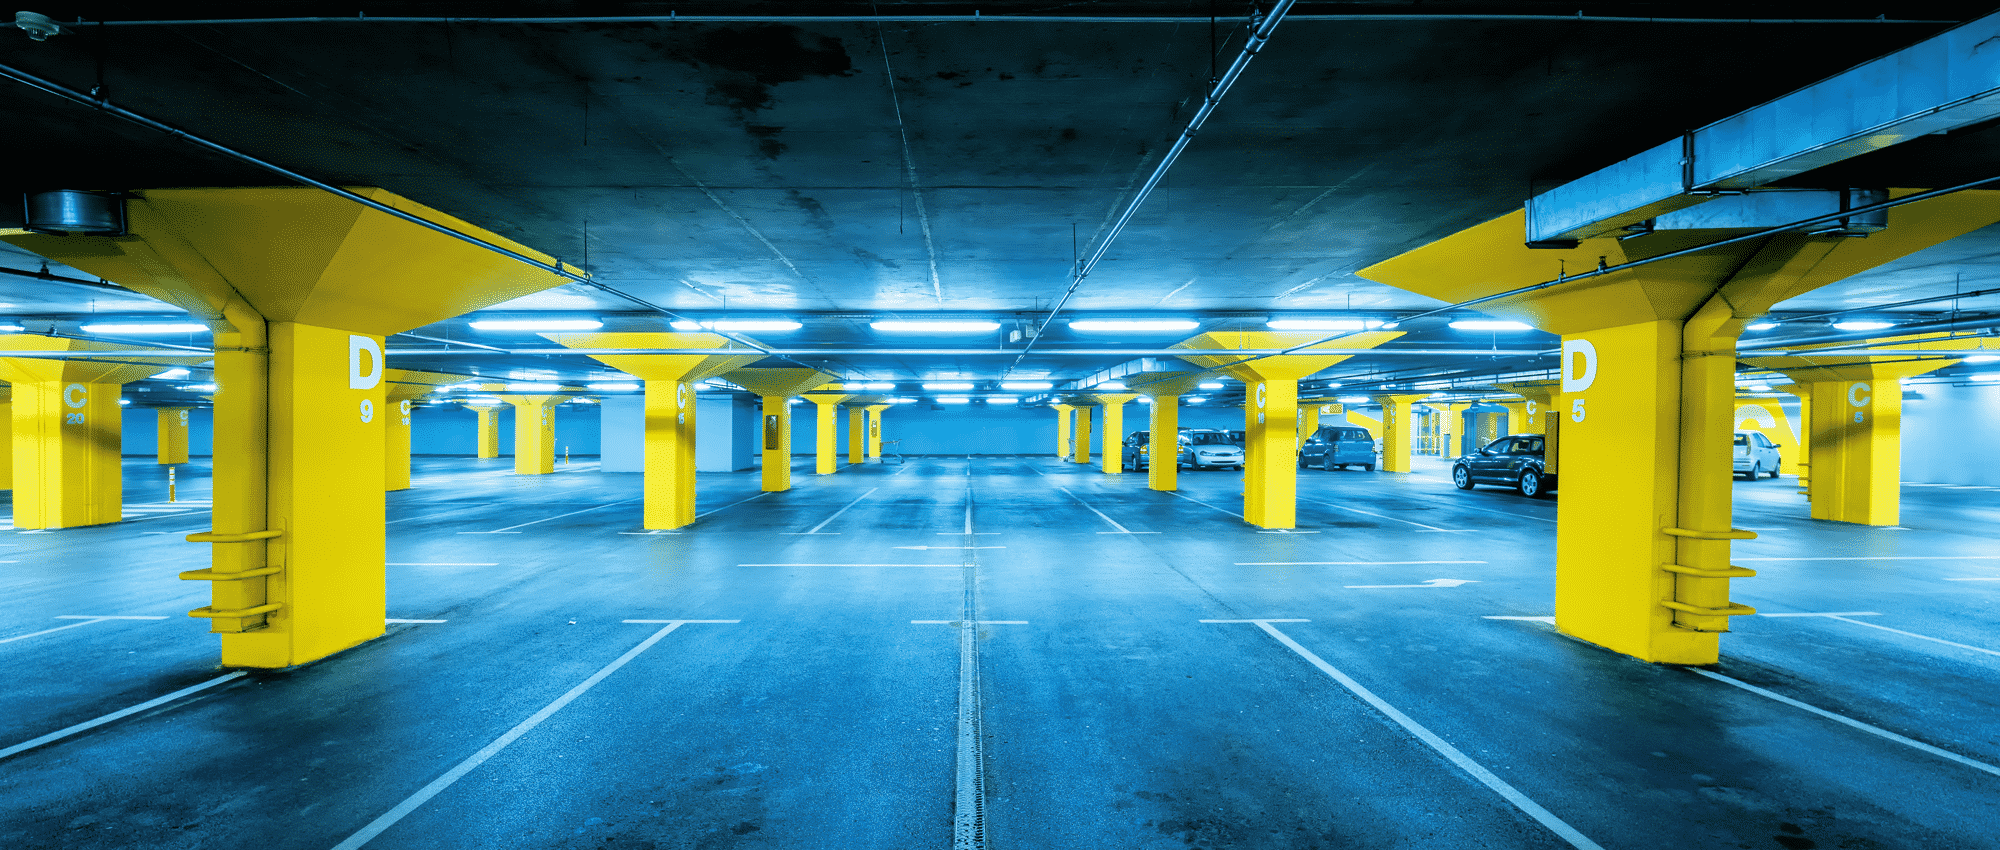 underground parking garabe |tax cuts and jobs act, parking deductions